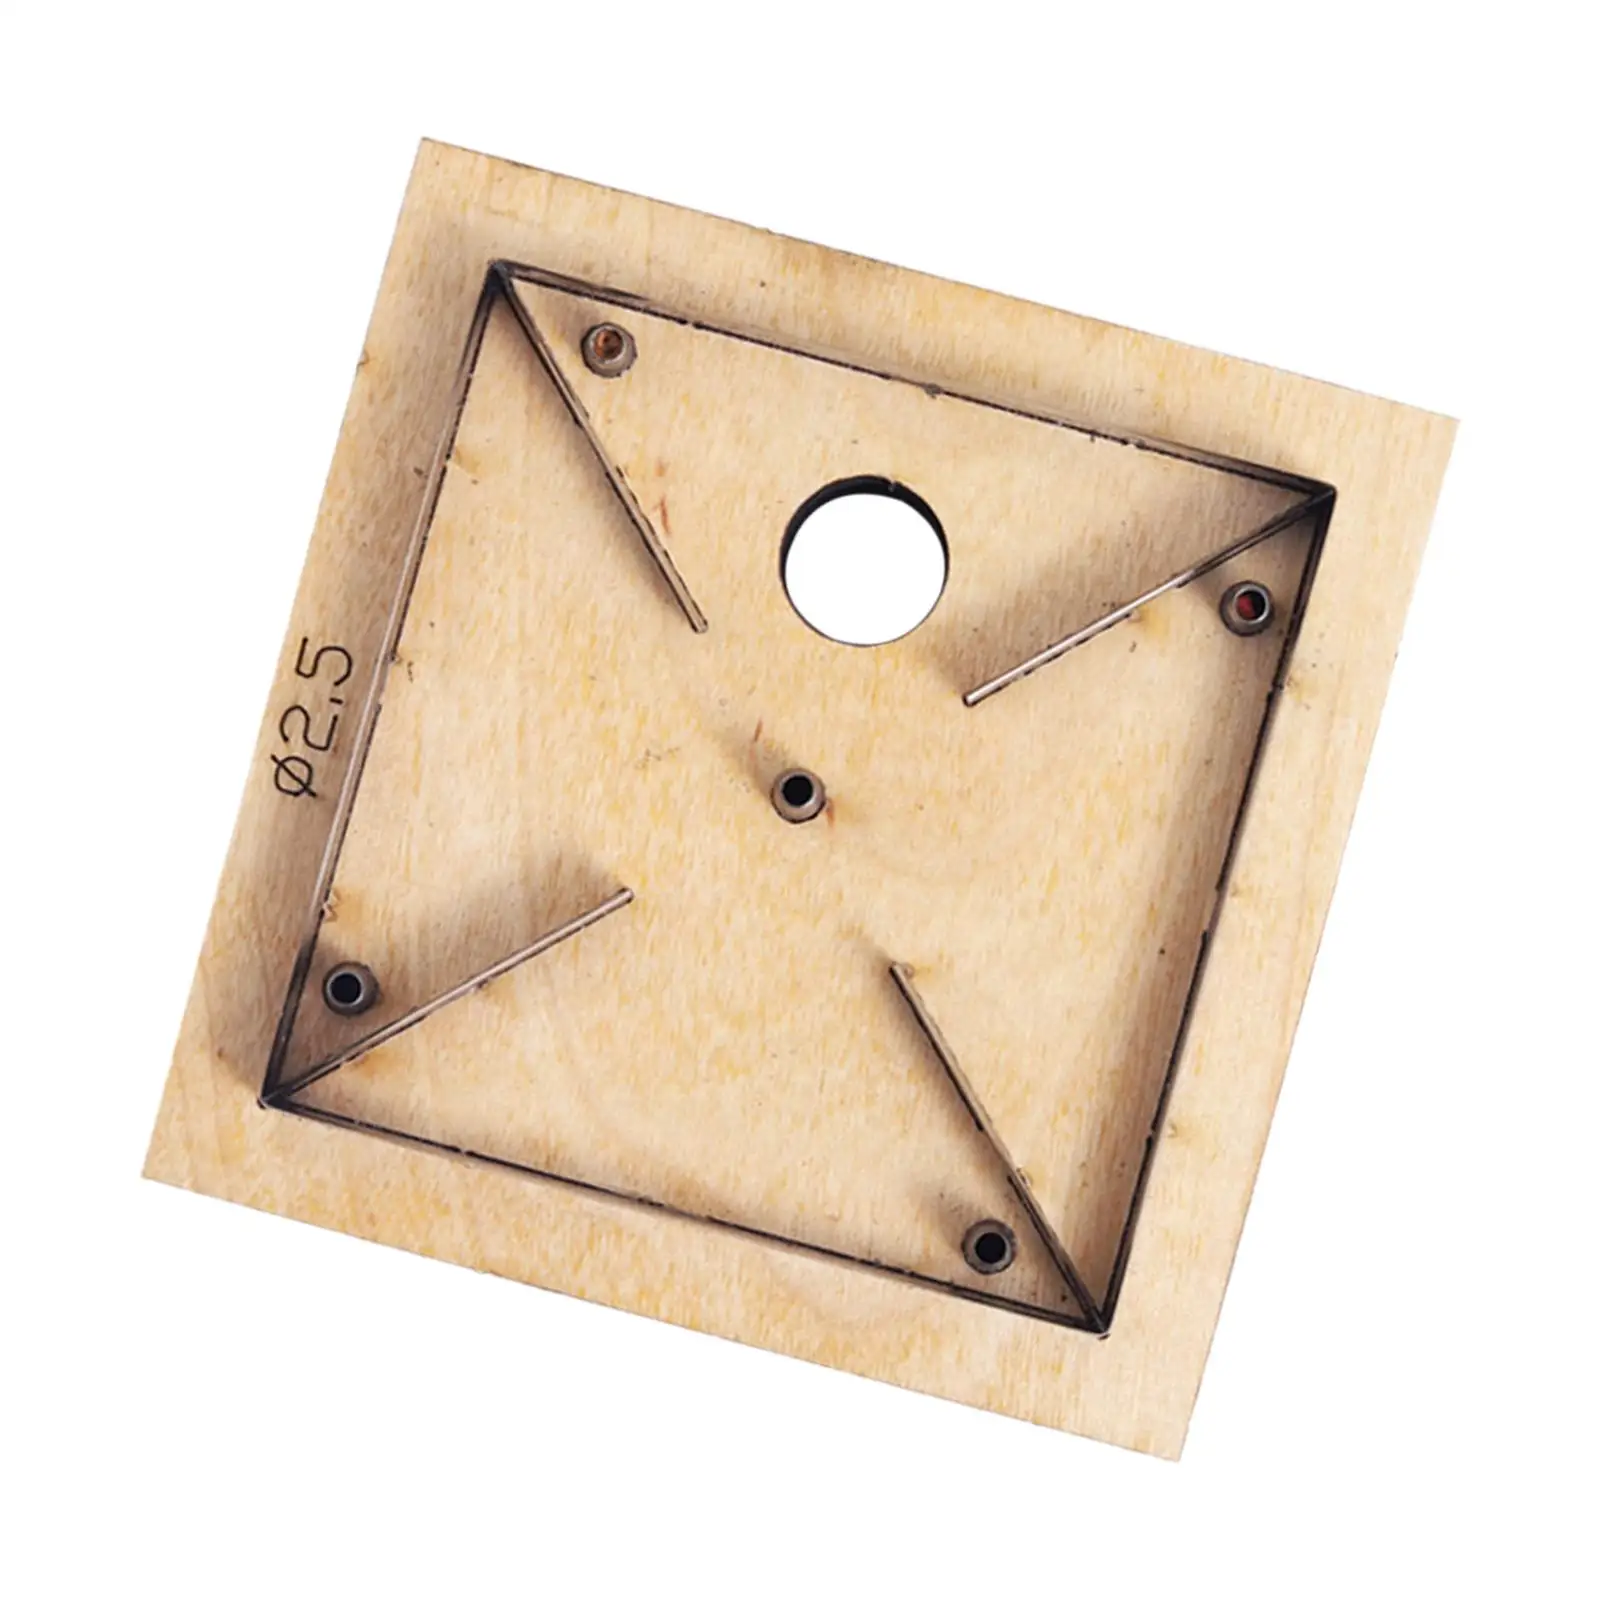 Wooden Leather Cutting Dies Pendant Templates Leather Craft Leather Template